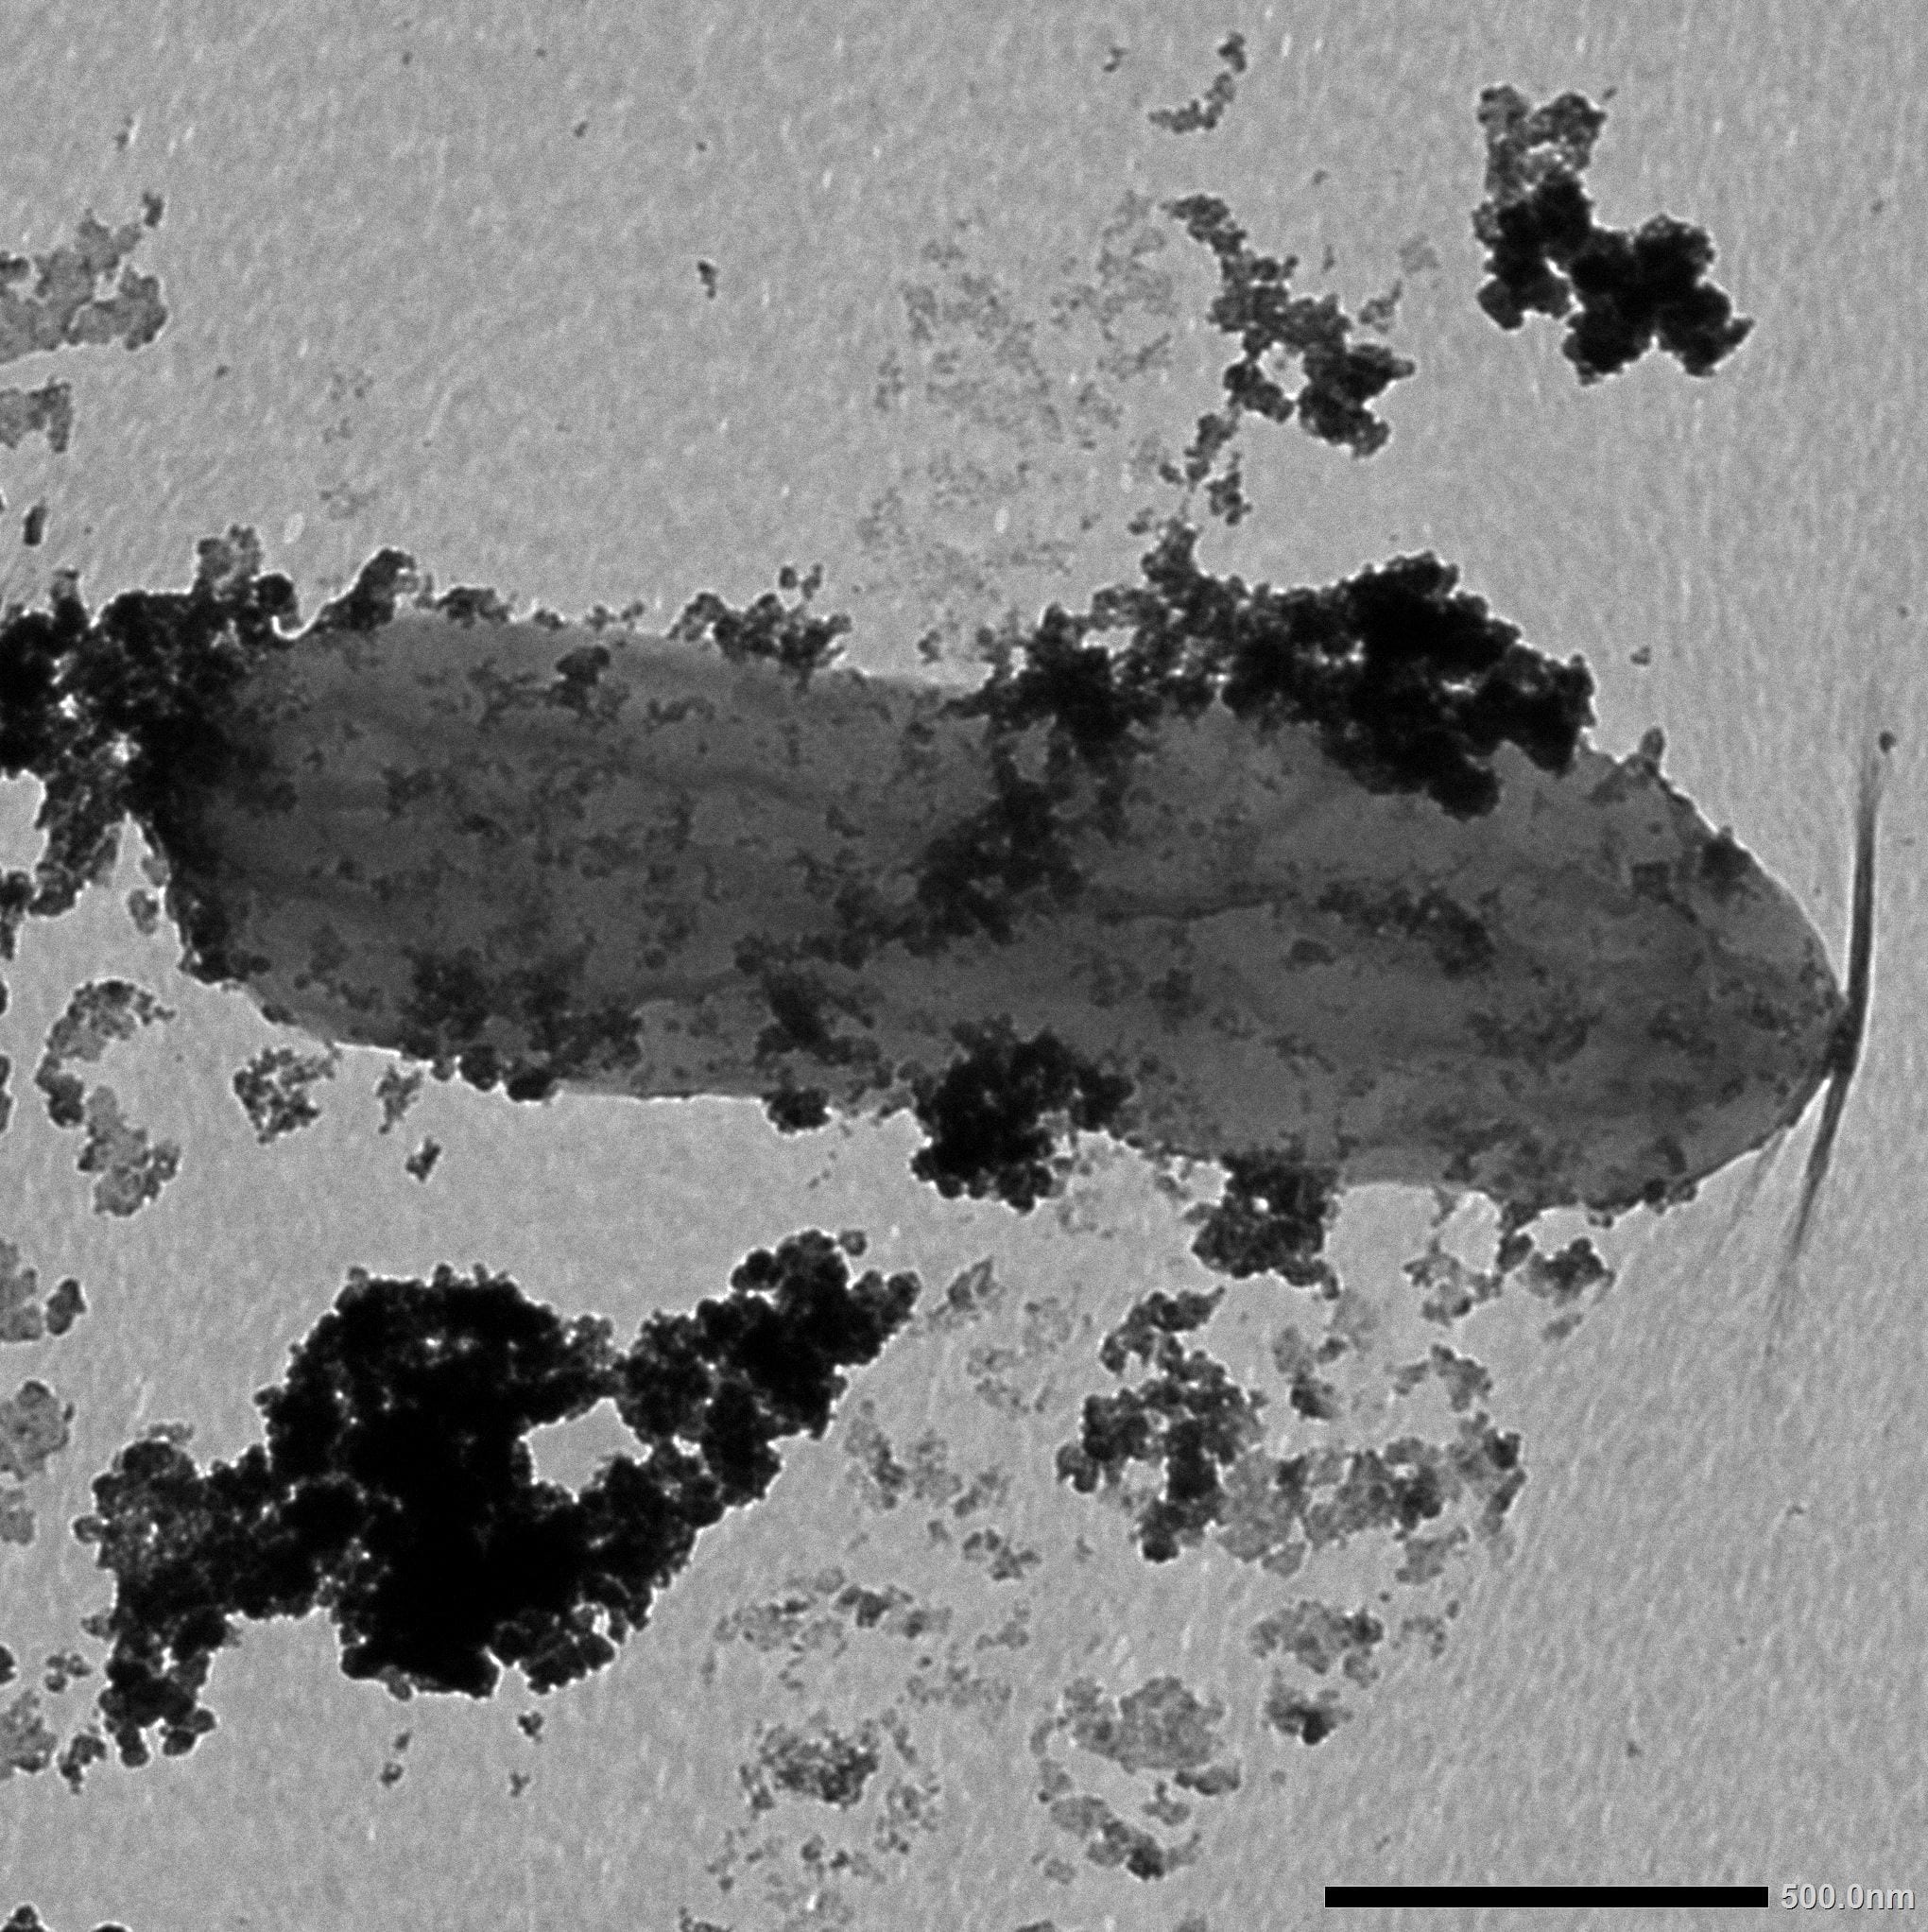 Geobacter could form the basis of new biotechnology built to reclaim and recycle cobalt from lithium-ion batteries